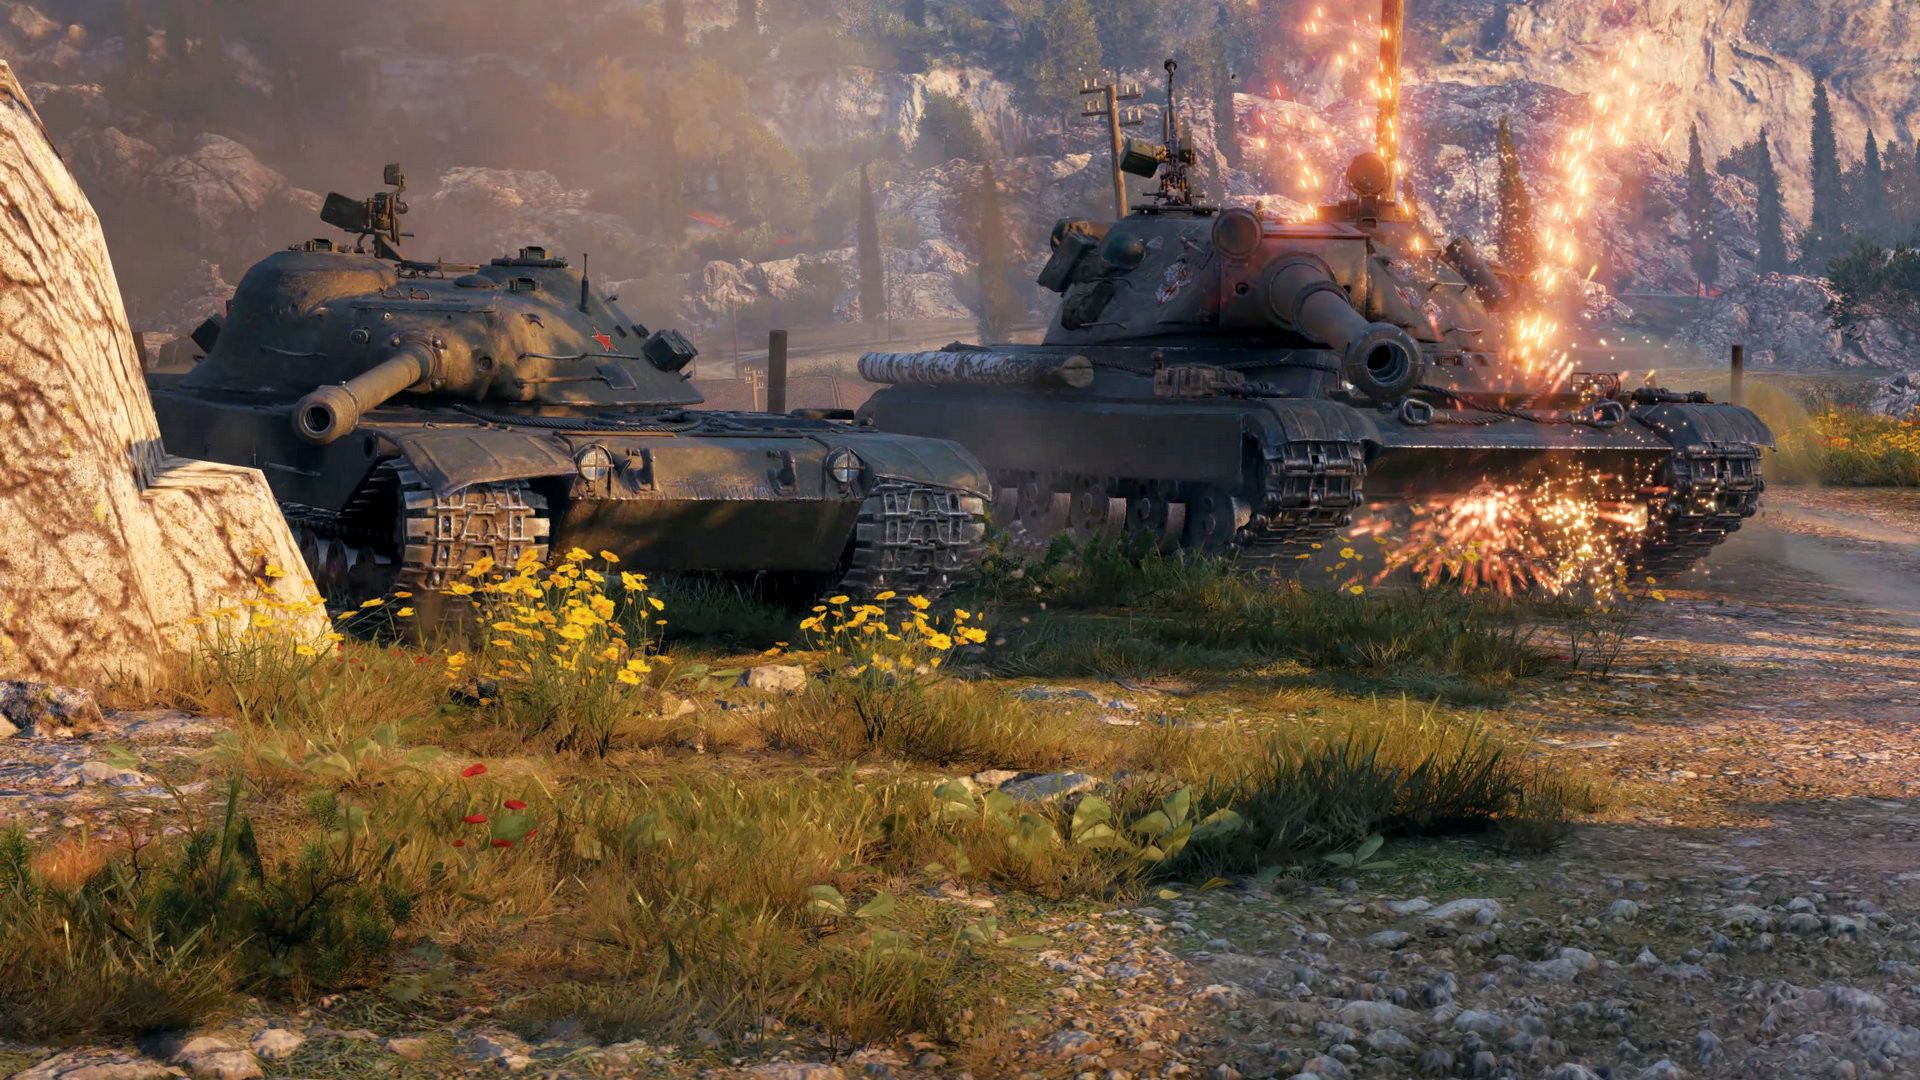 Sign up to World of Tanks to get a free premium tank and 600 gold